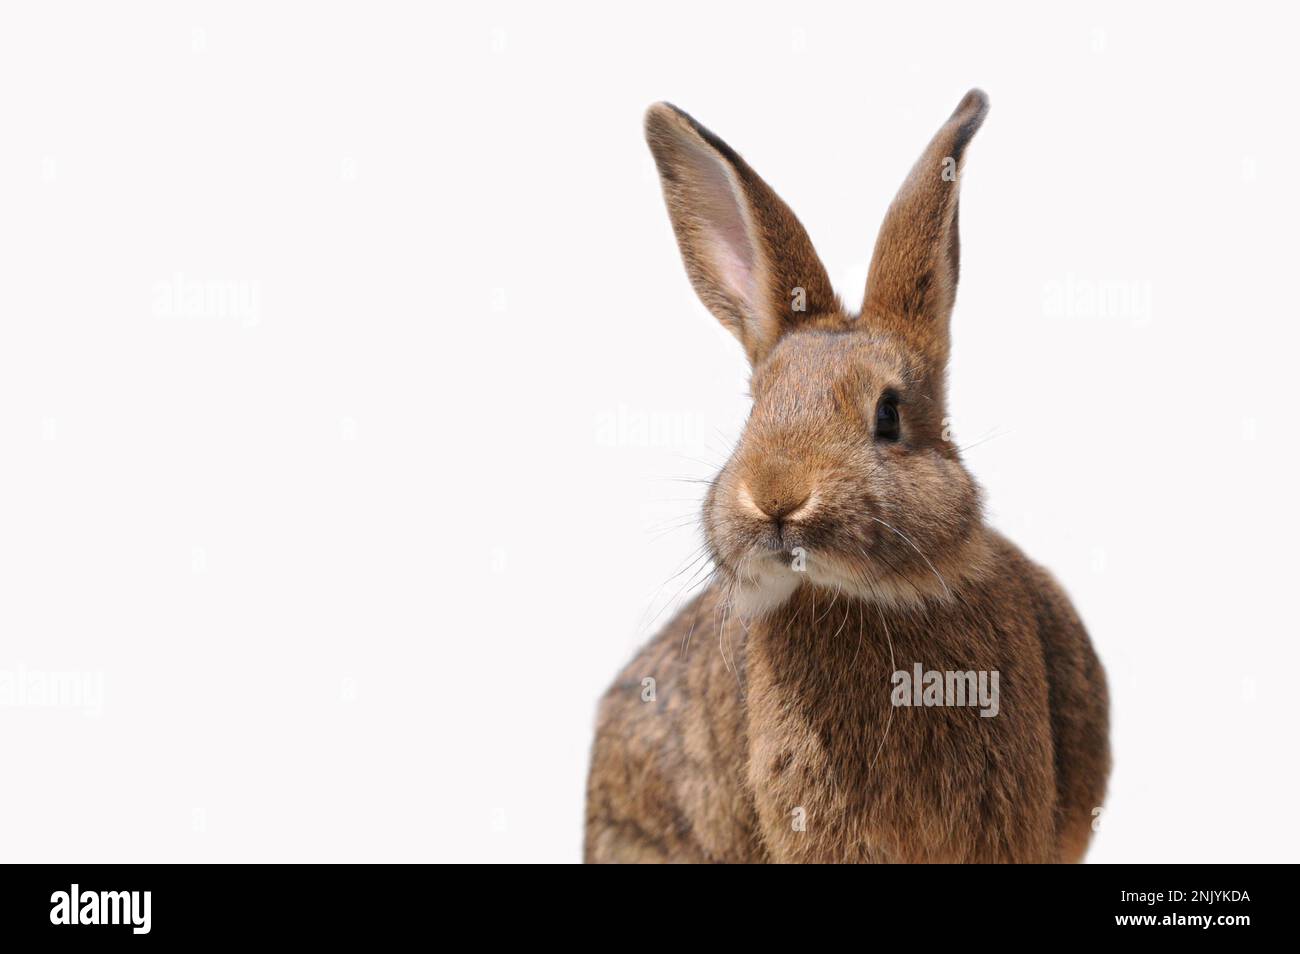 Sitting young brown bunny. The rabbit is isolated on white and is an easter symbol. Stock Photo